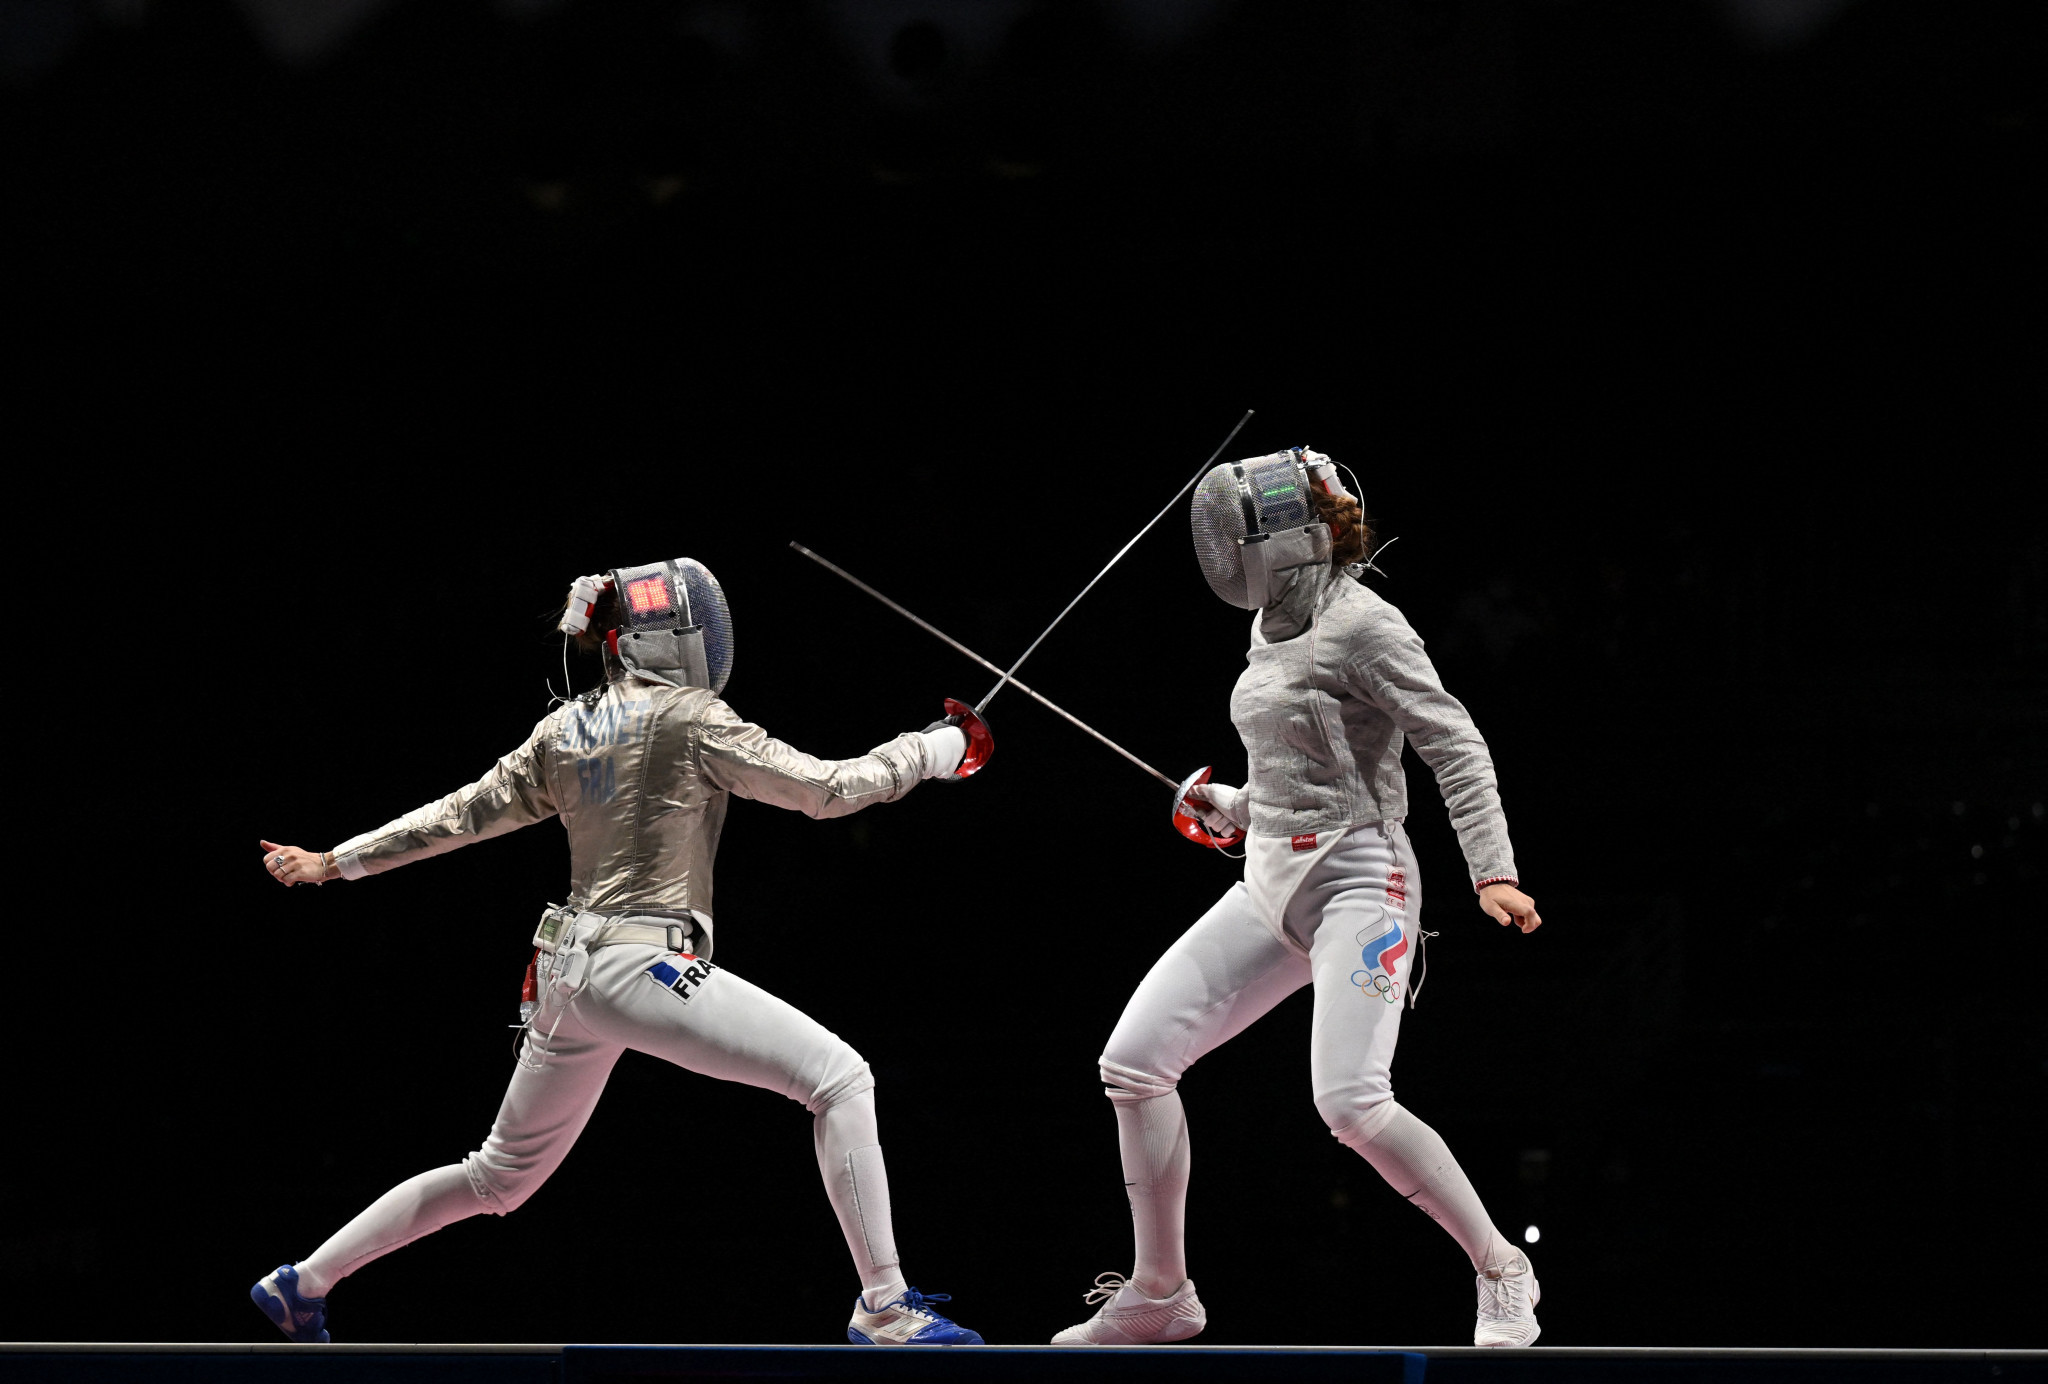 France clinch second straight women's team sabre FIE World Cup victory